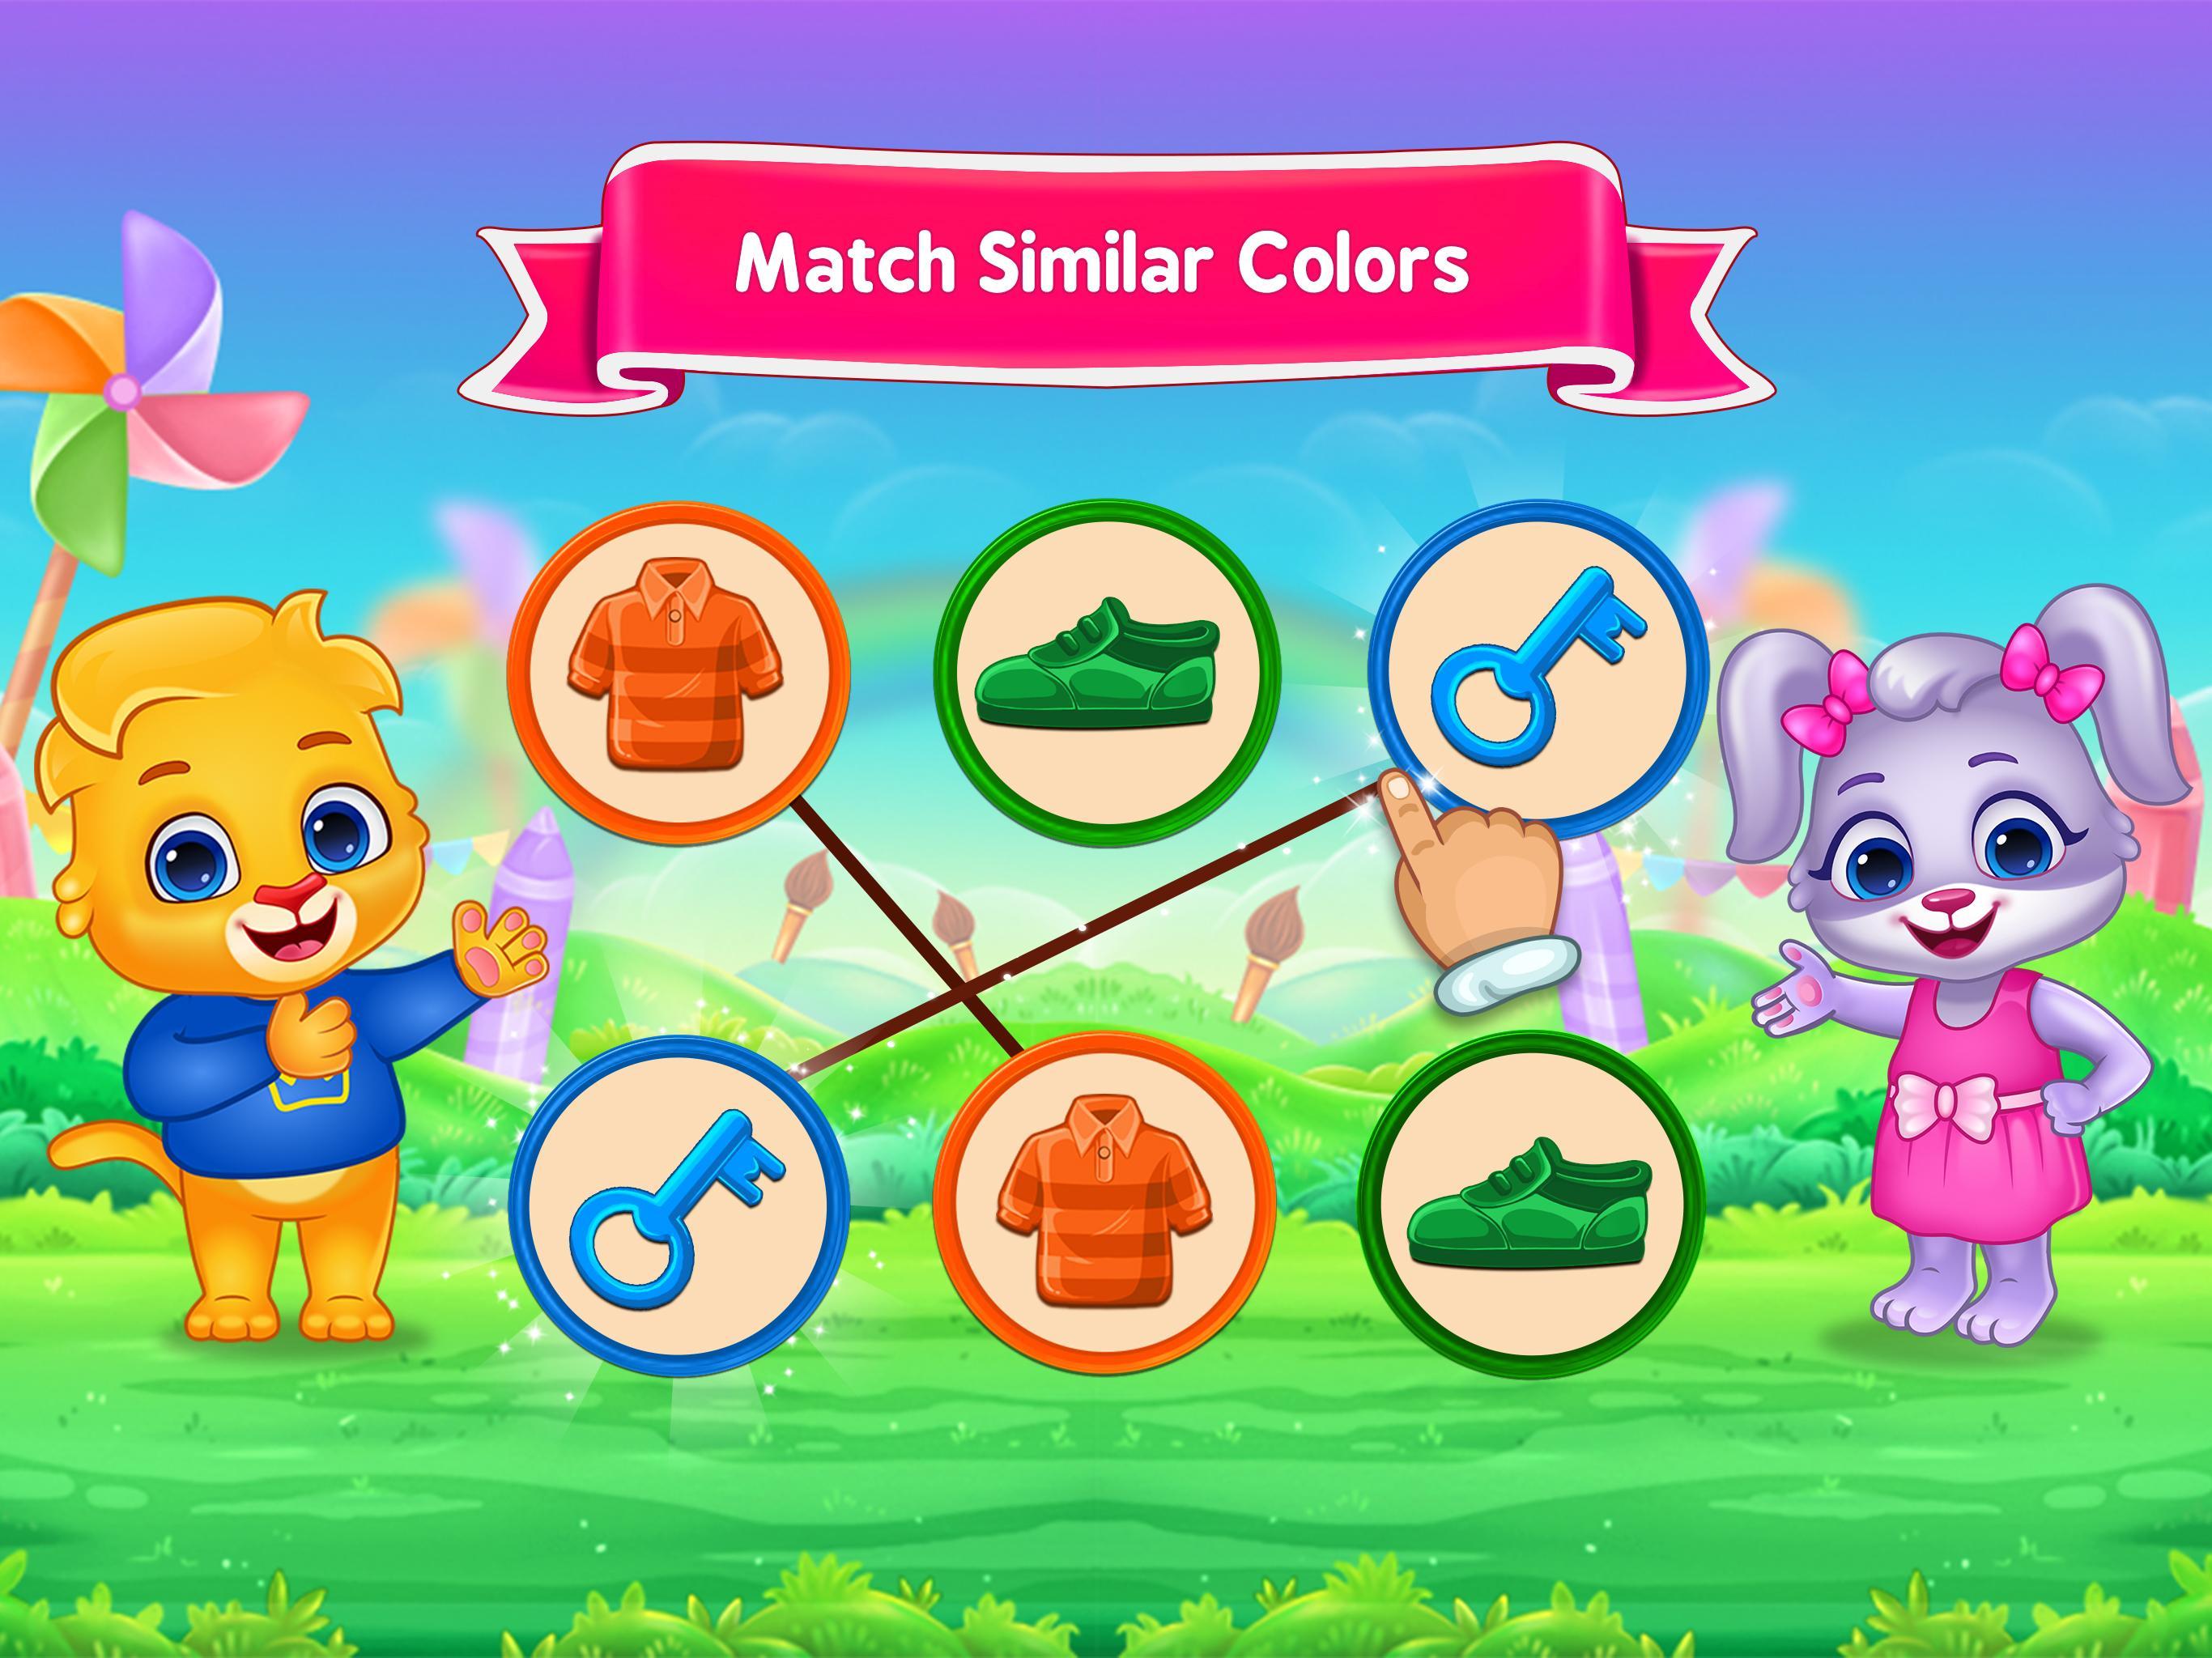 Colors & Shapes - Kids Learn Color and Shape 1.2.5 Screenshot 21